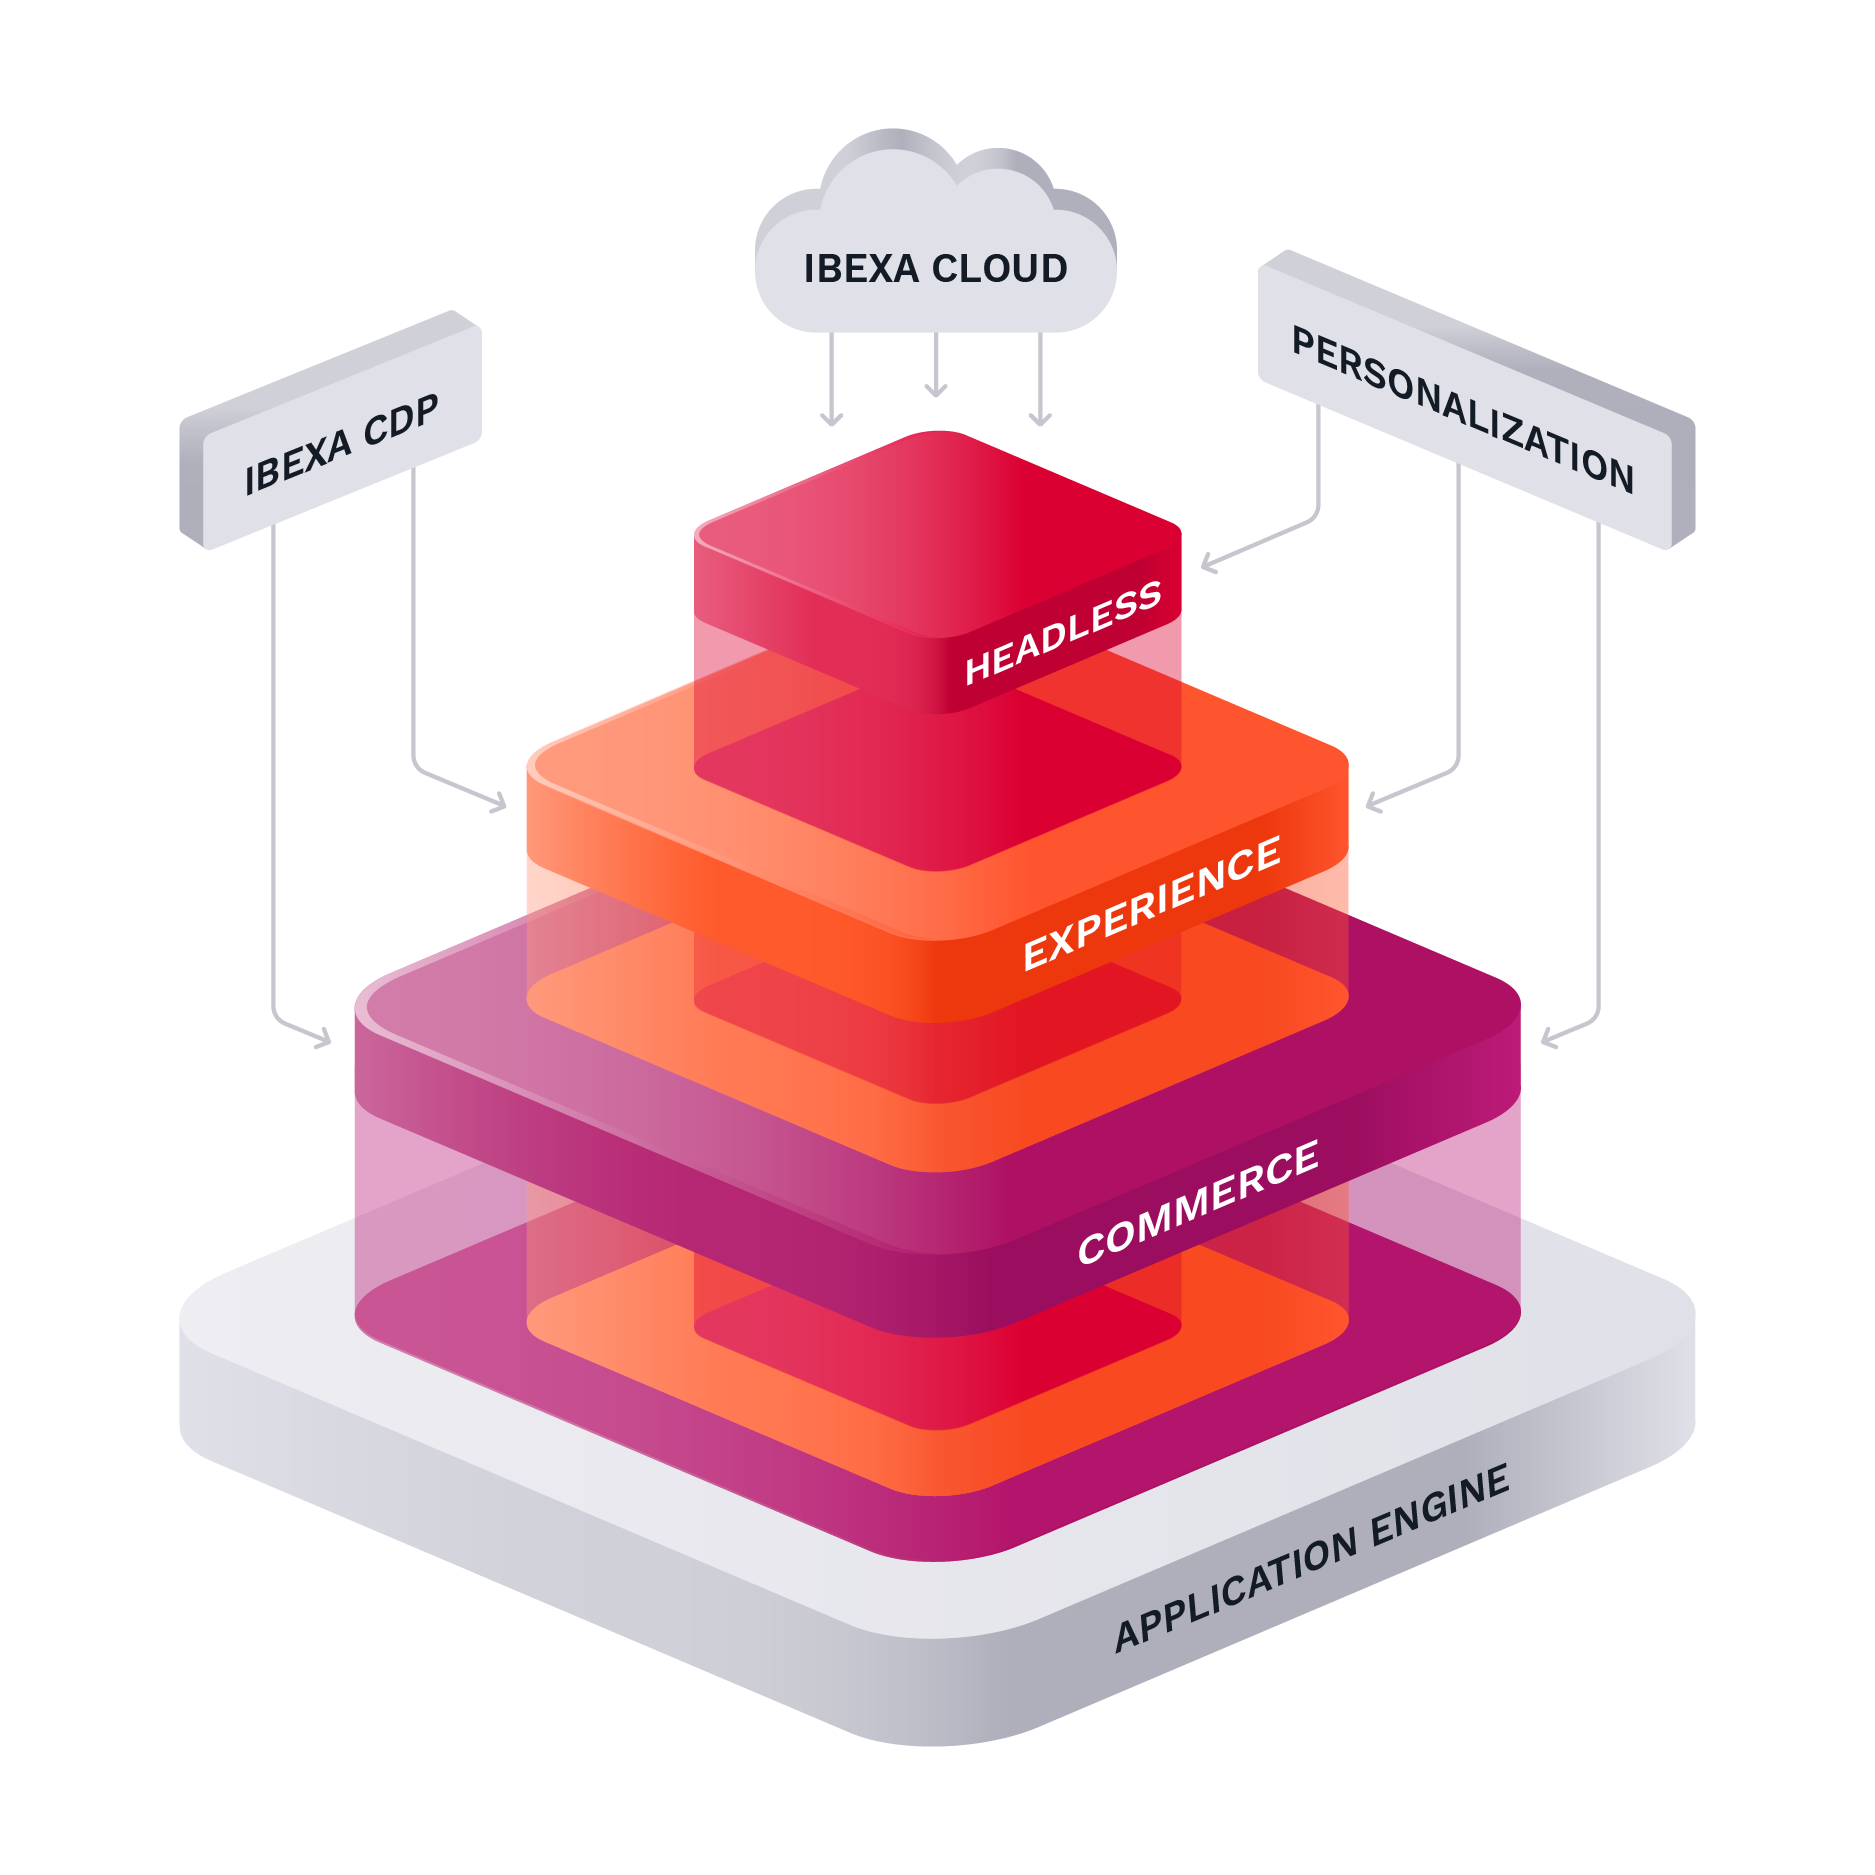 Ibexa DXP Stack (Application Engine, Content, Experience und Commerce)